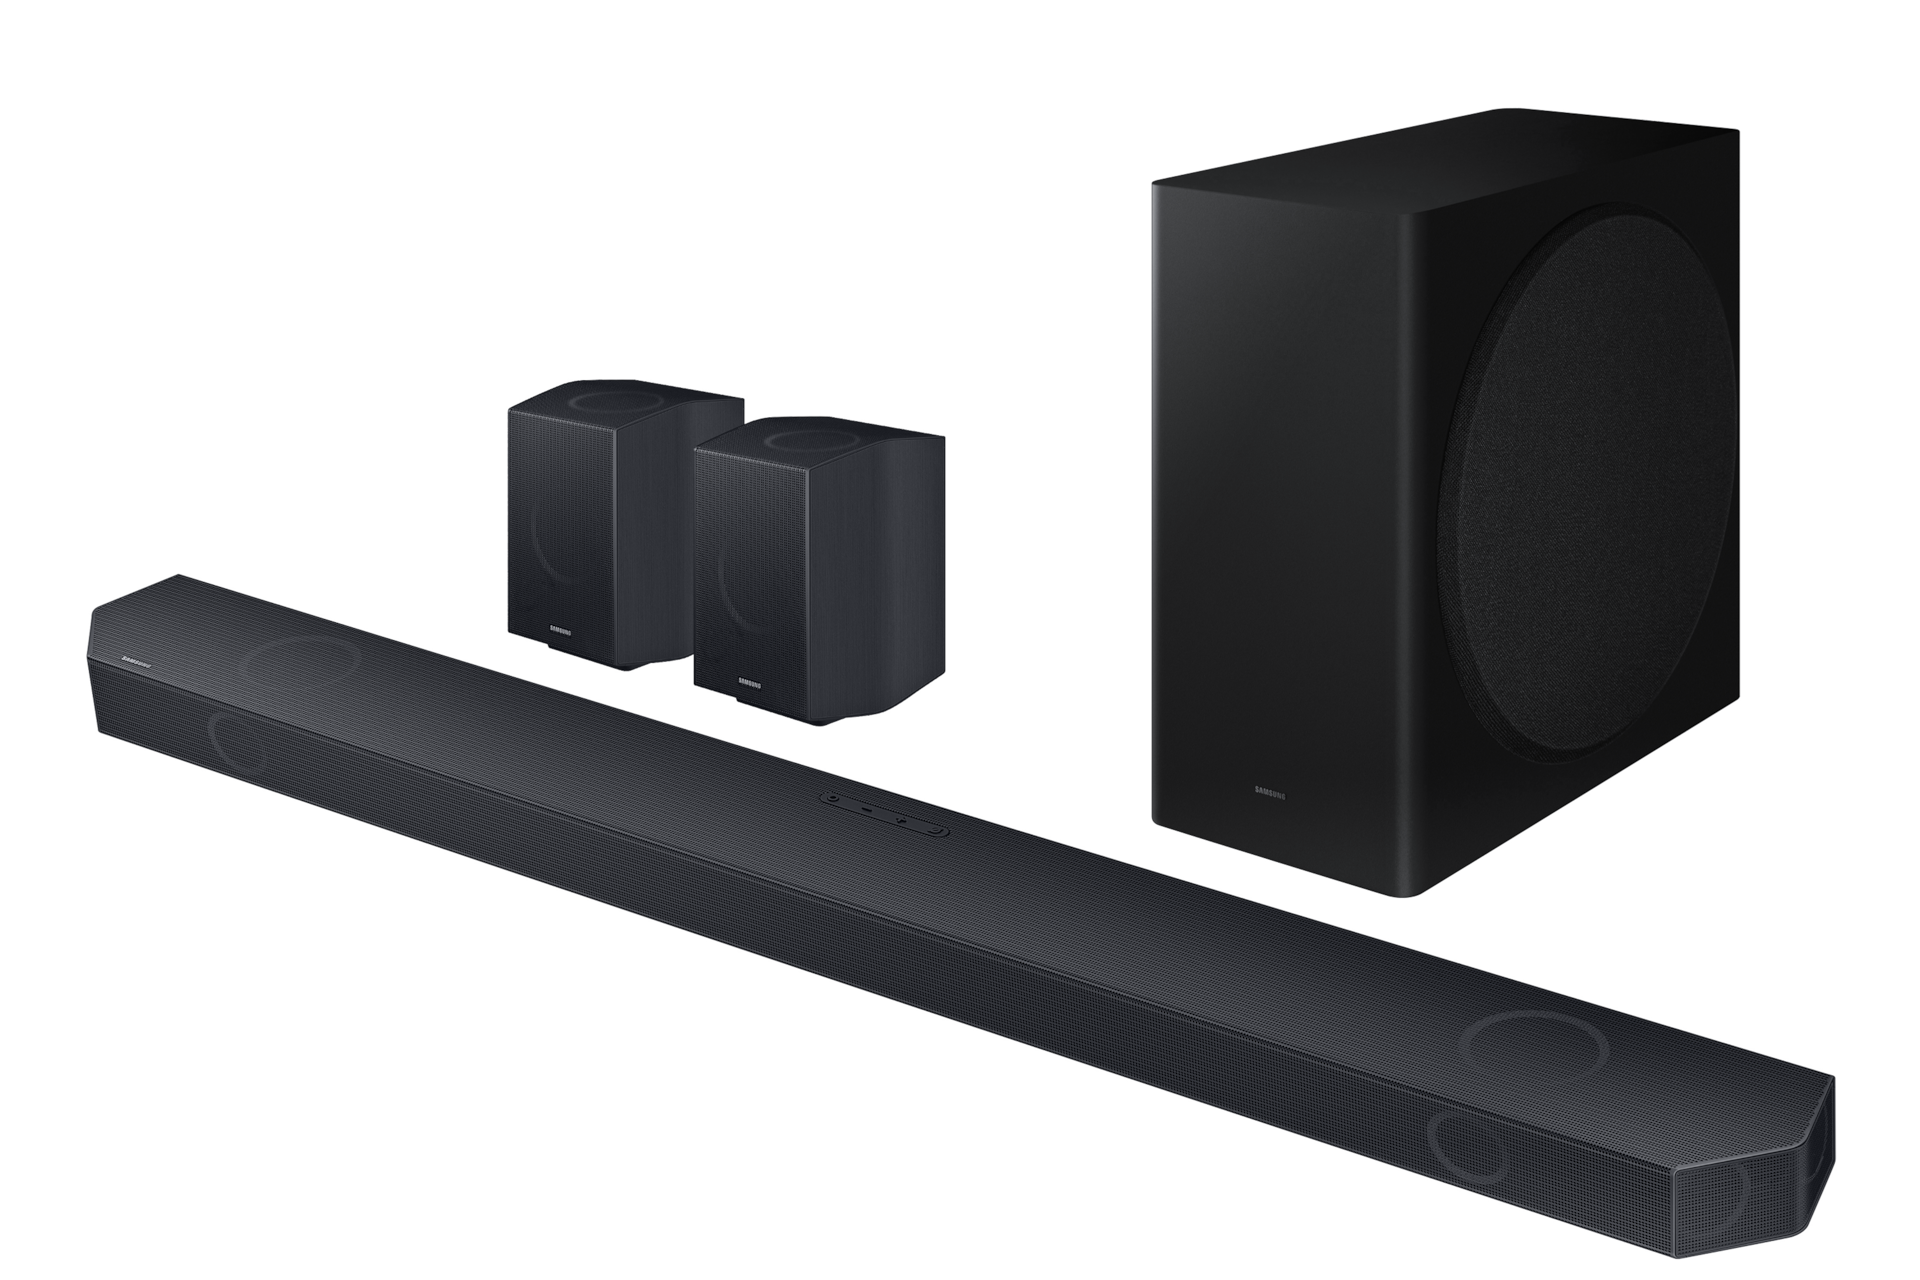 Latest Samsung Q Series Soundbar with Subwoofer (HW-Q930C/XM) - set-r-perspective view, Titan Black color at best price in Samsung Malaysia